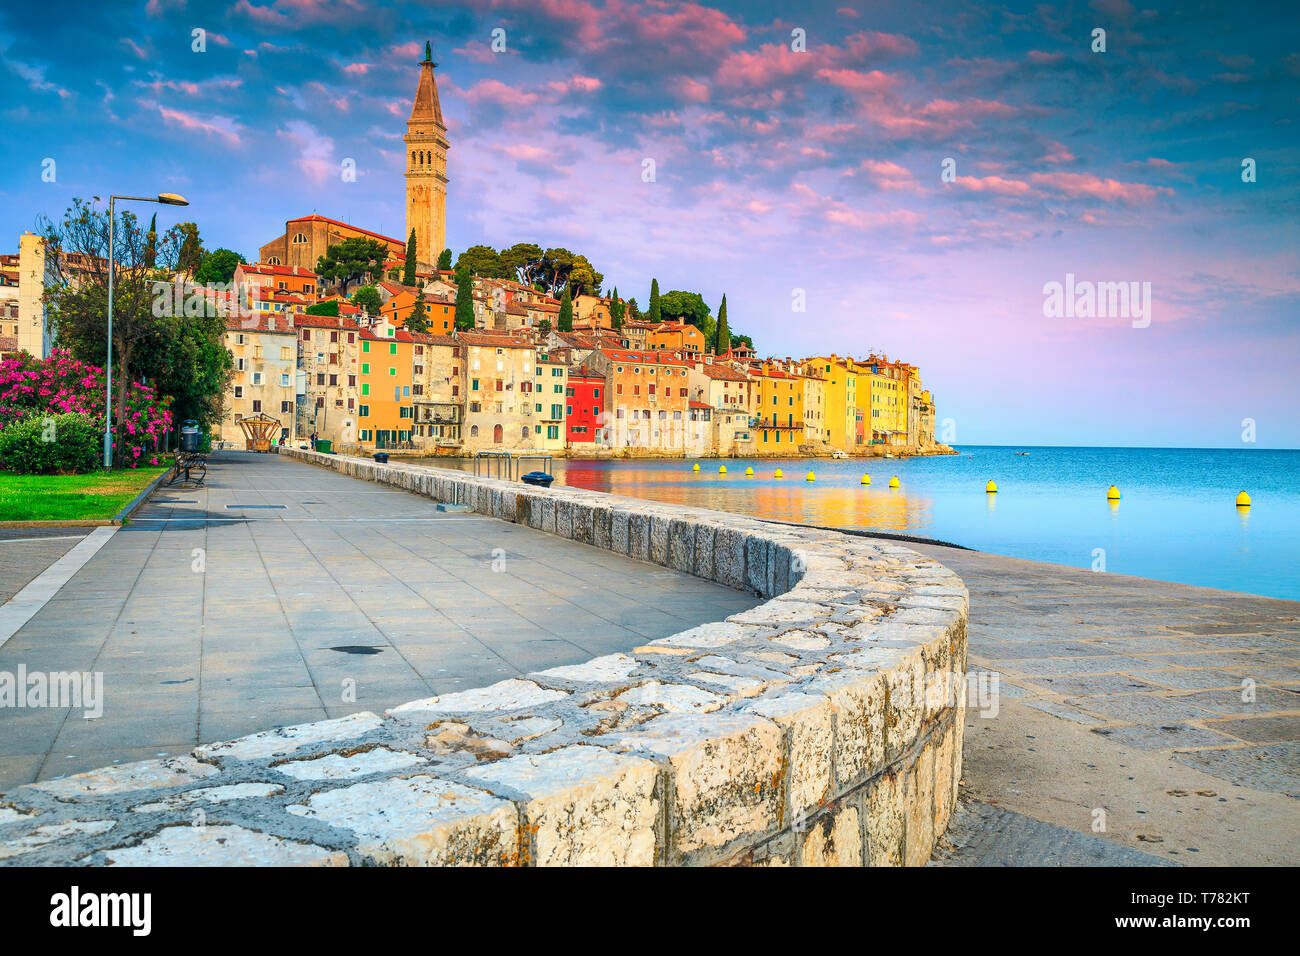 Popular mediterranean travel location. Amazing promenade on the waterfront with colorful medieval buildings and oleander flowers, Rovinj, Istria regio Stock Photo